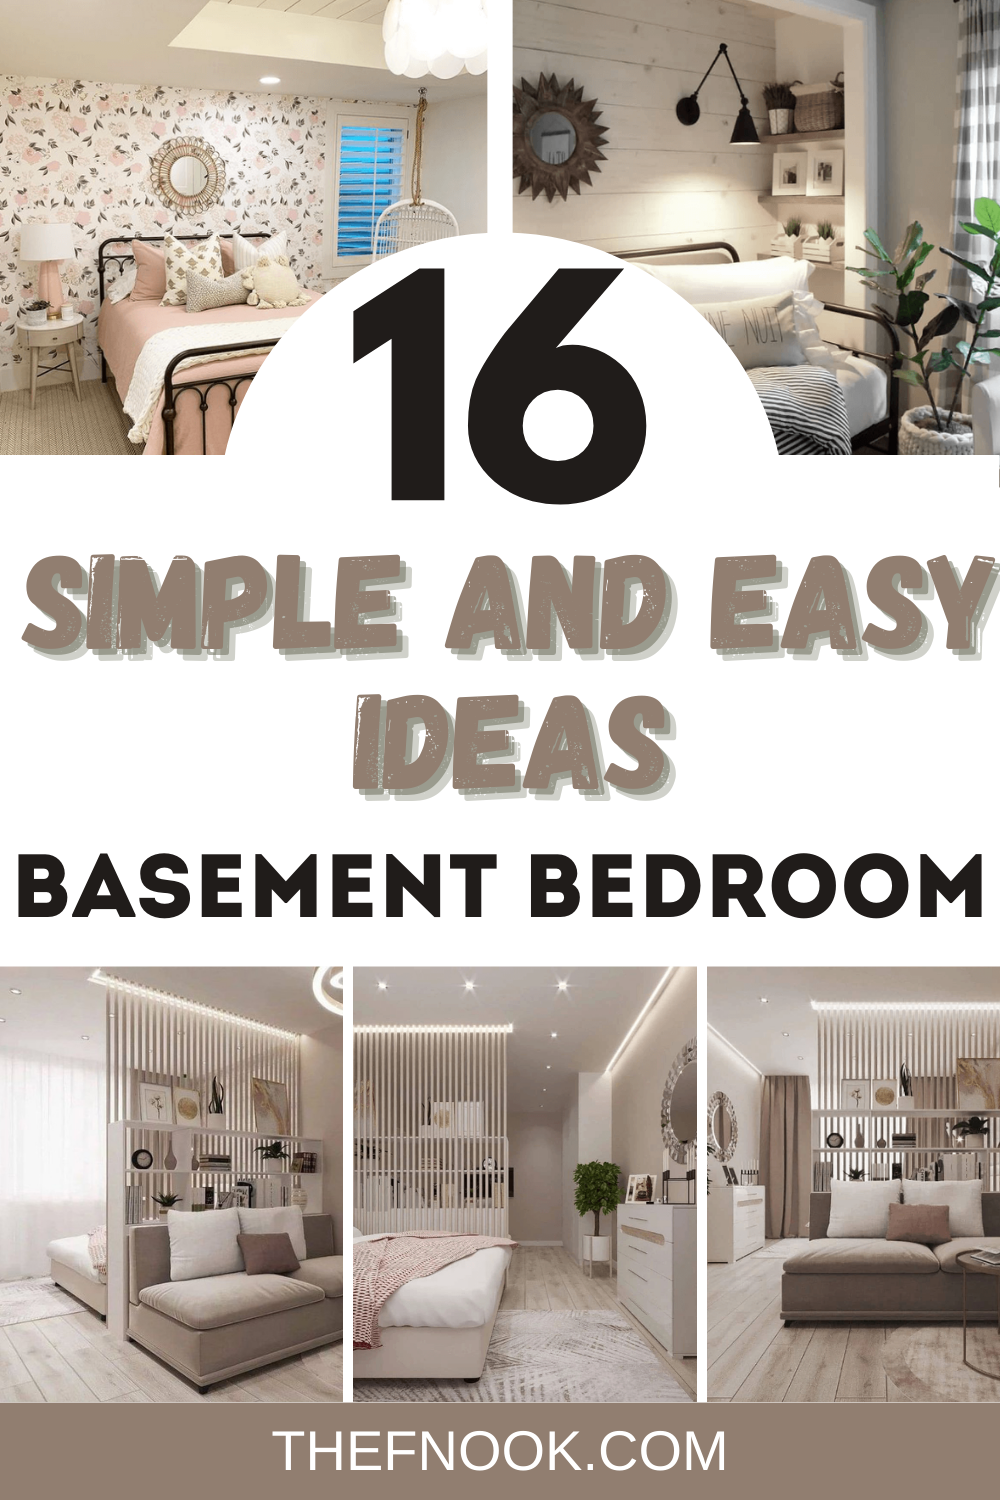 16 Simple and Easy Basement Bedroom Ideas for a Renewed Space